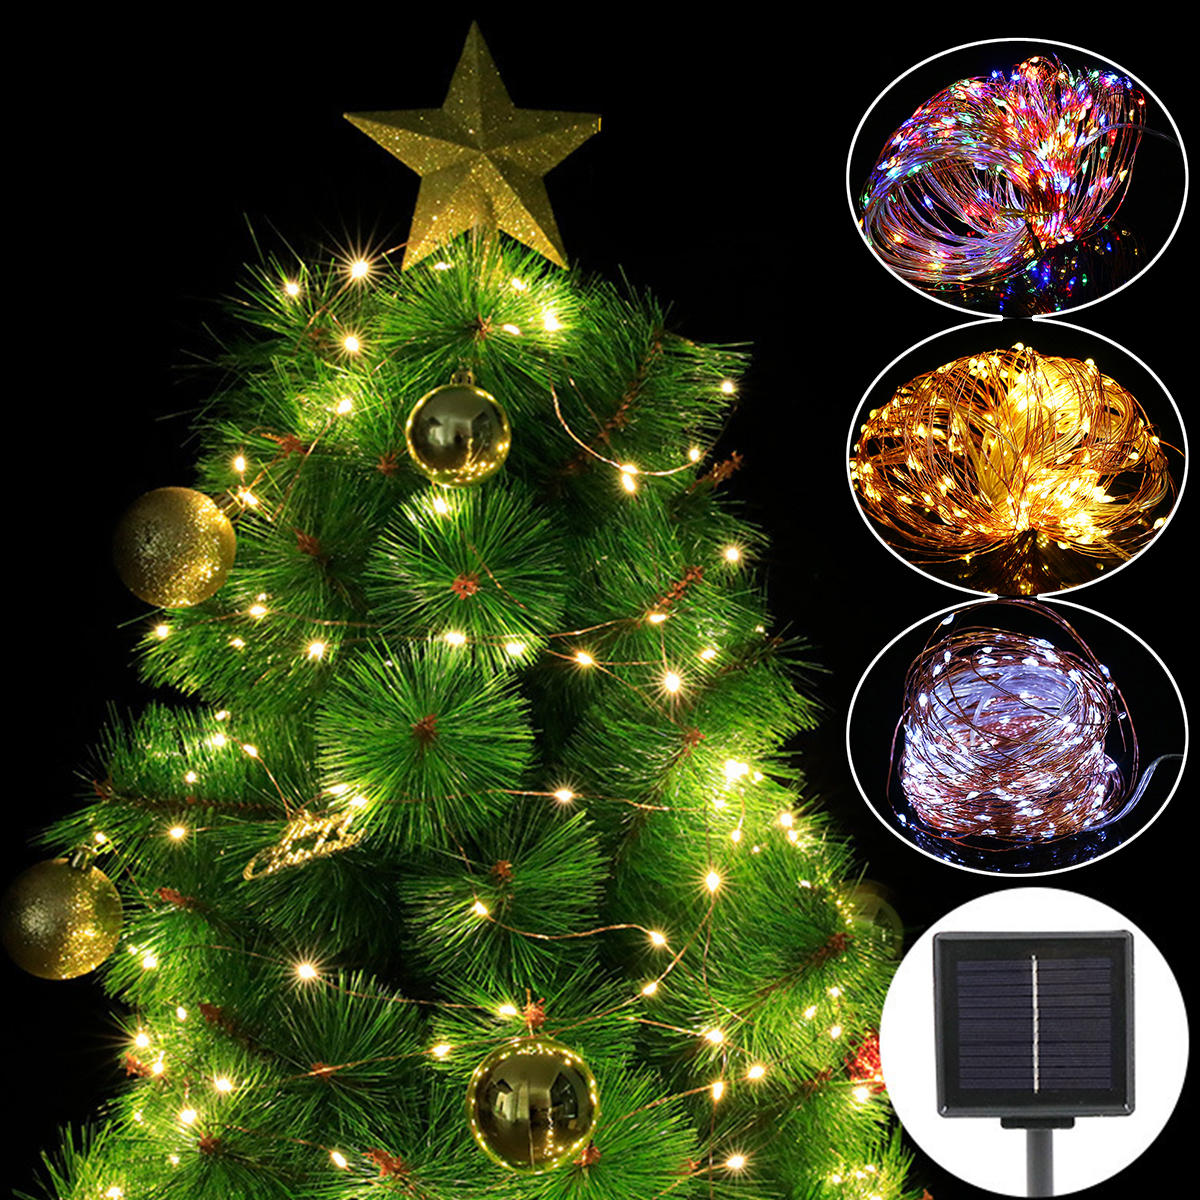 12M-22M-LED-Solar-Power-String-Light-8-Modes-Copper-Wire-Fairy-Outdoor-Garden-Waterproof-Holiday-Dec-1713762-8